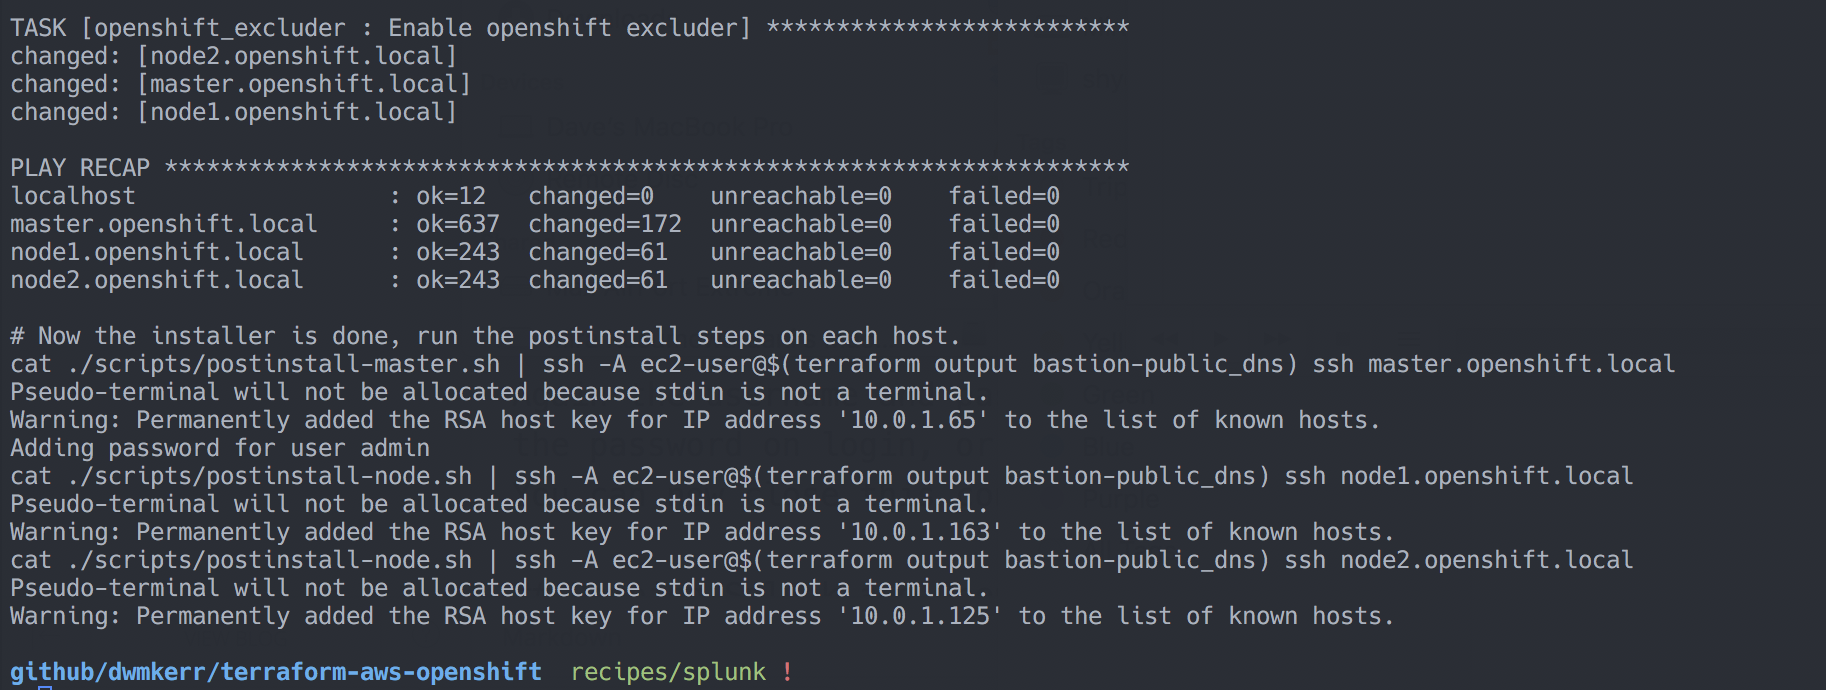 OpenShift Installation Complete